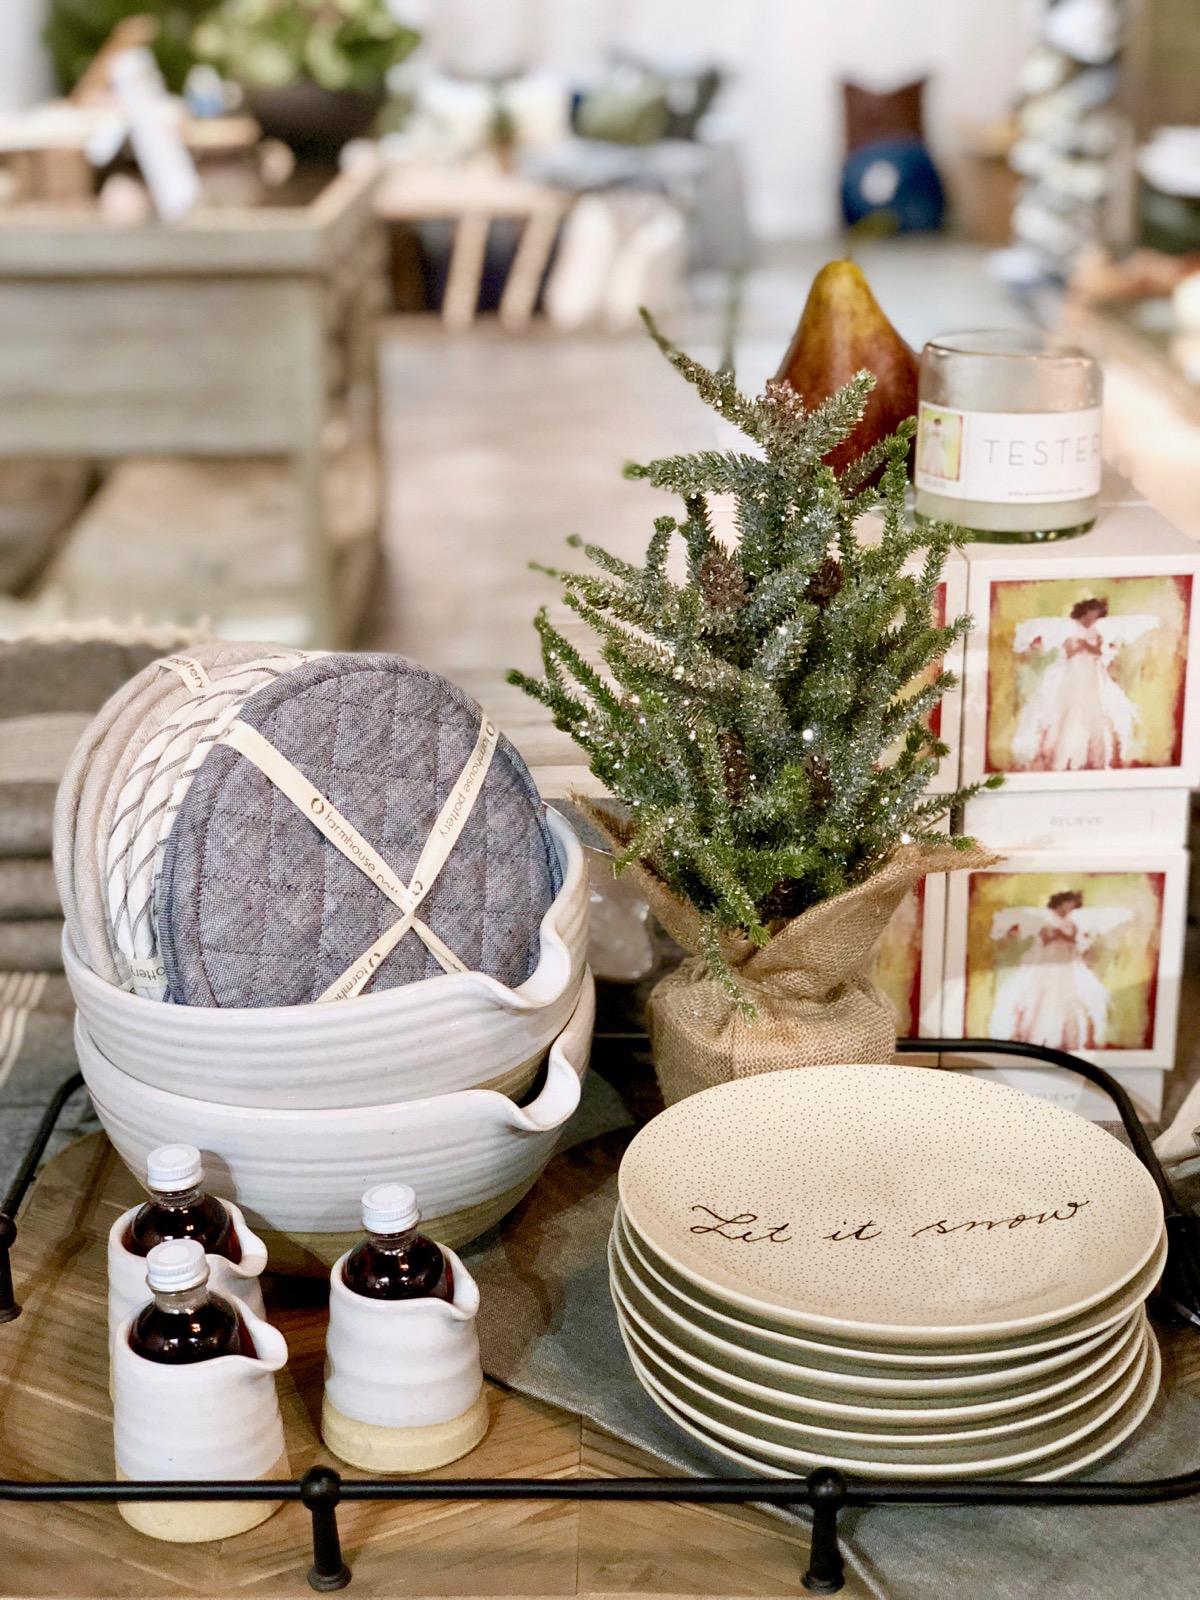  Petite Silo Pitcher &amp; Vermont Maple Syrup Sets {$36.00} with "Let It Snow" Plates {$14.00}, Anne Neilson Luxury Candle Gift Set {$54.00 }, Quilted Linen Oven Mitts {$54.00}, Glittered Tree {$34.00} 